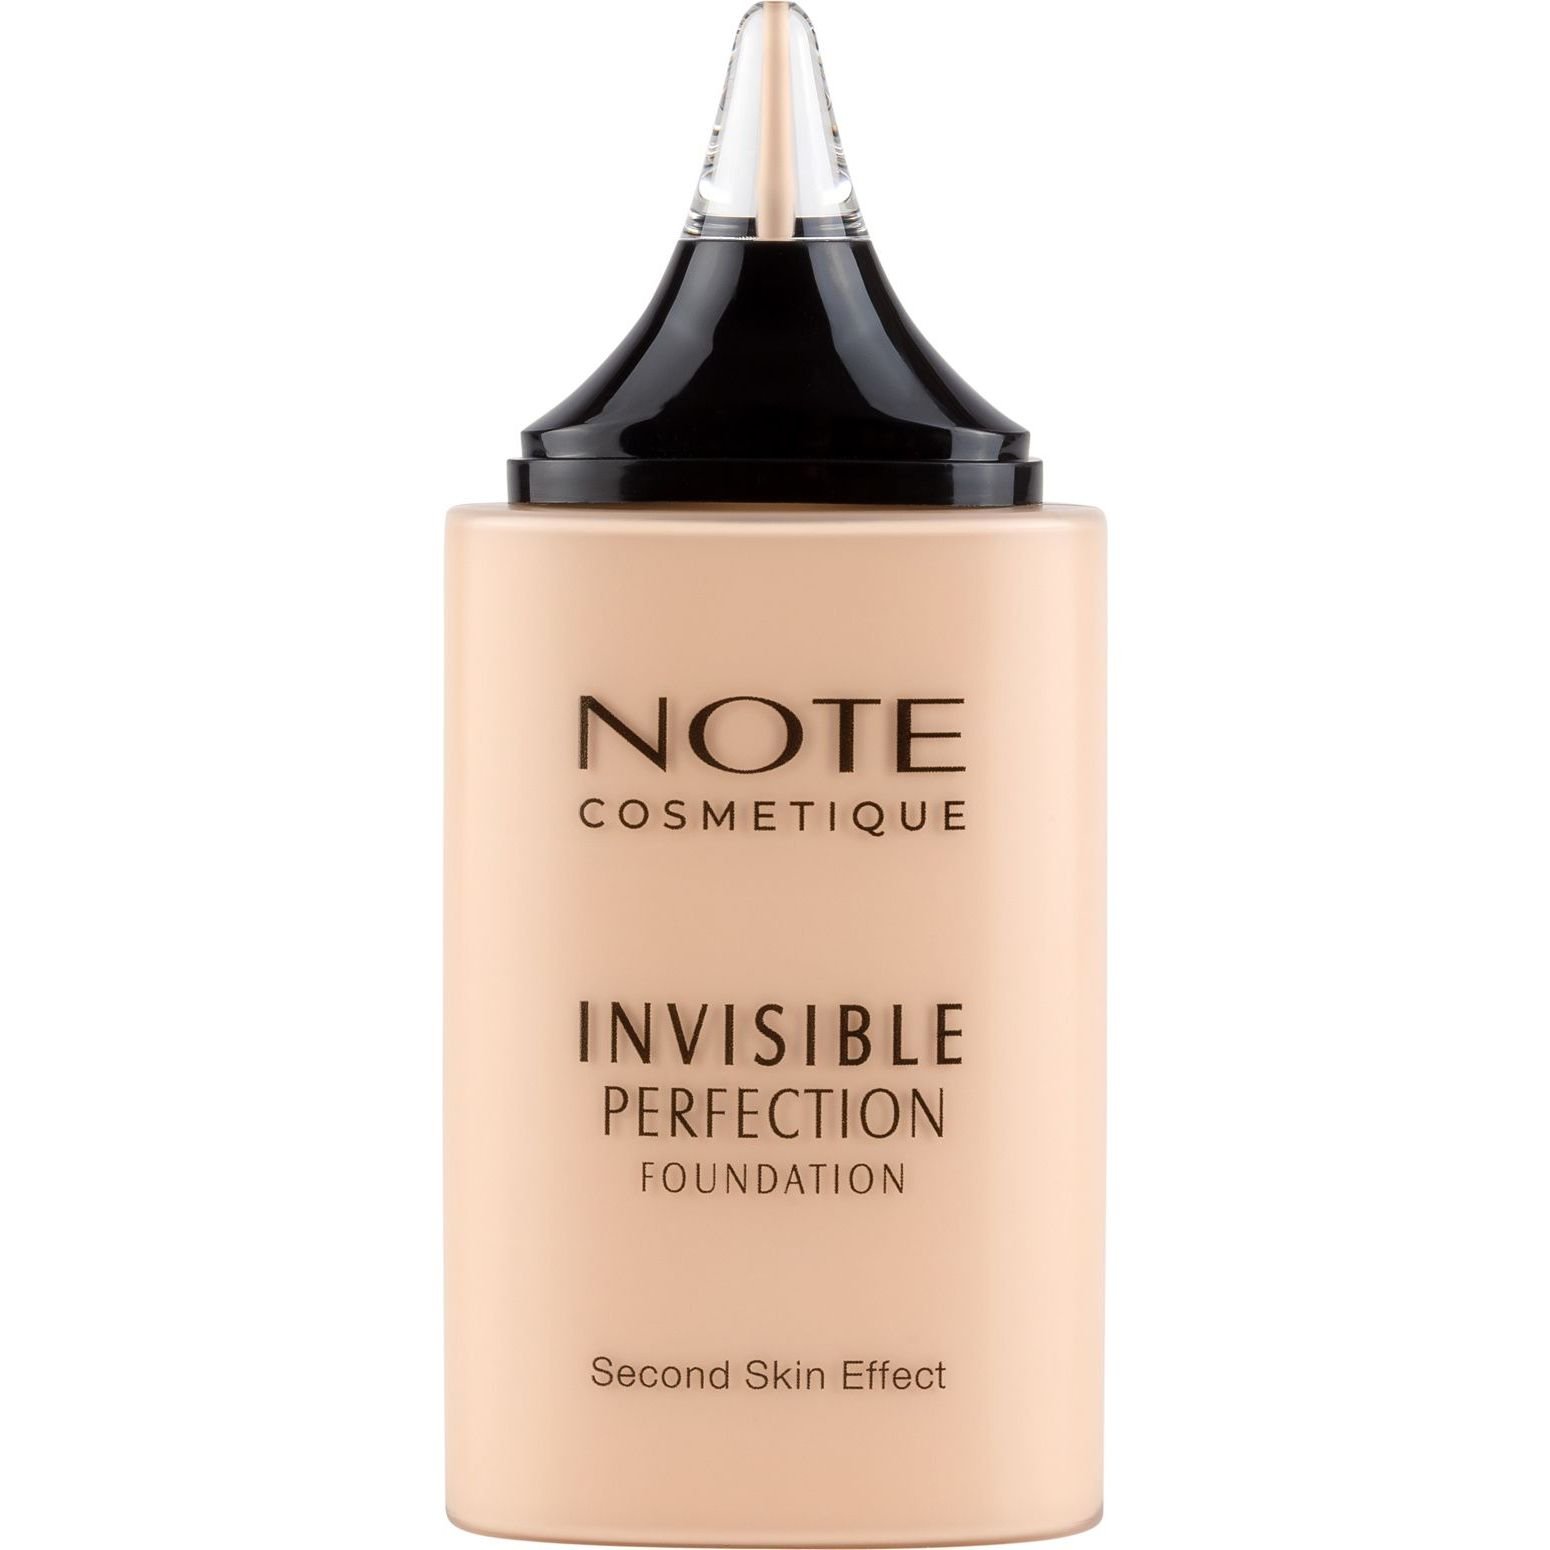 Тональная основа Note Cosmetique Invisible Perfection Foundation тон 120 (Natural Ivory) 35 мл - фото 2